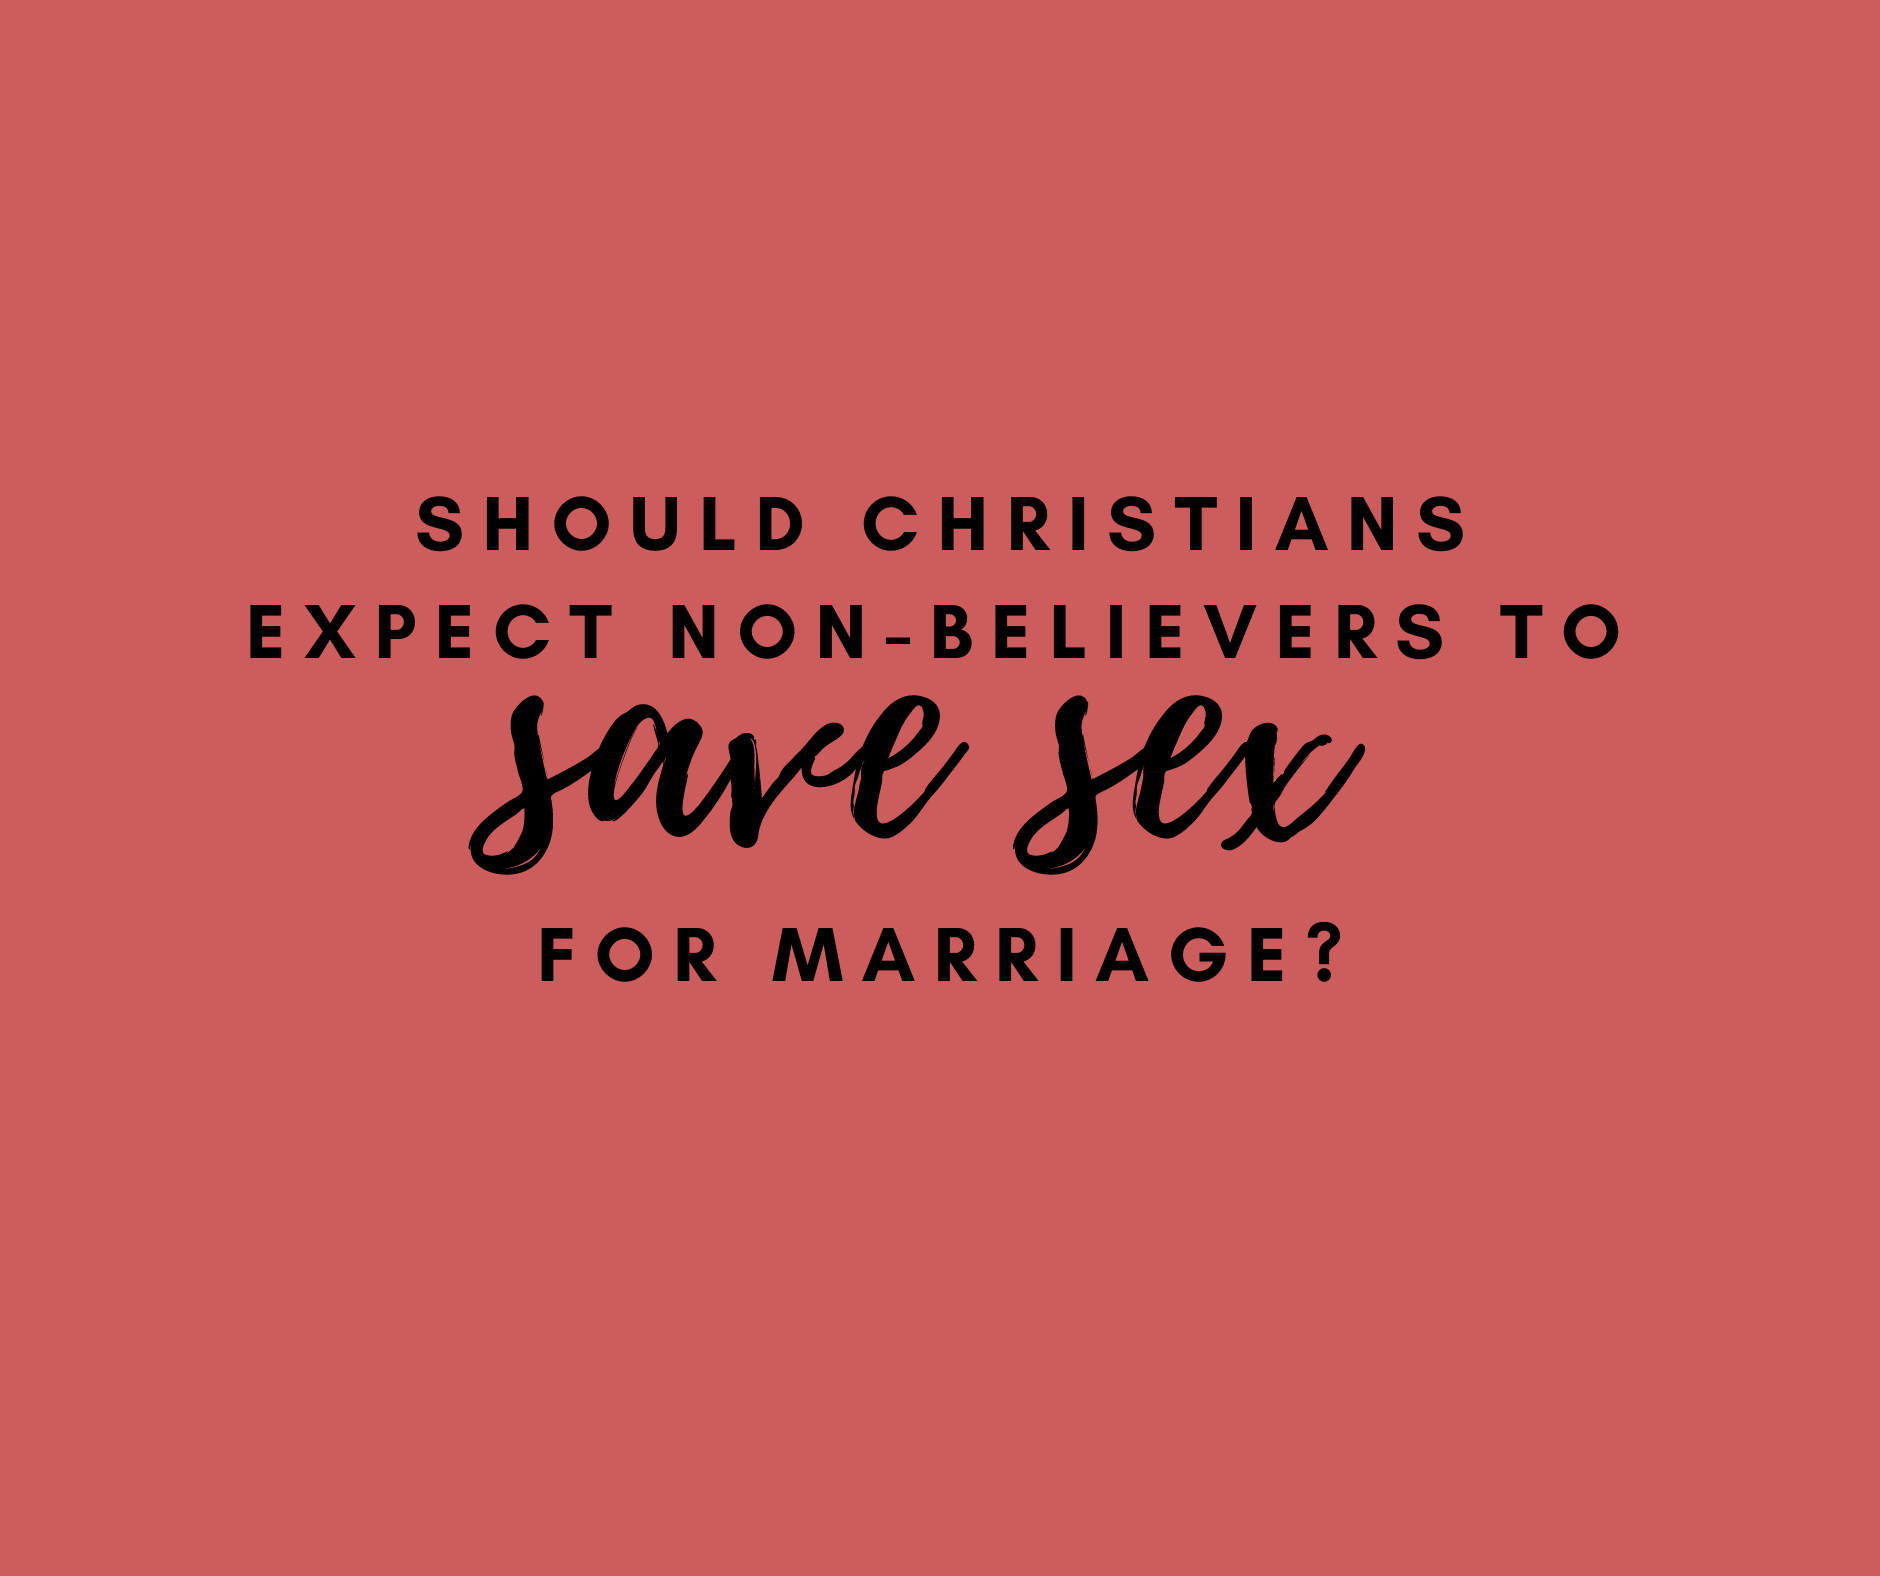 Should Christians Expect Non-Believers to Save Sex for Marriage? pic